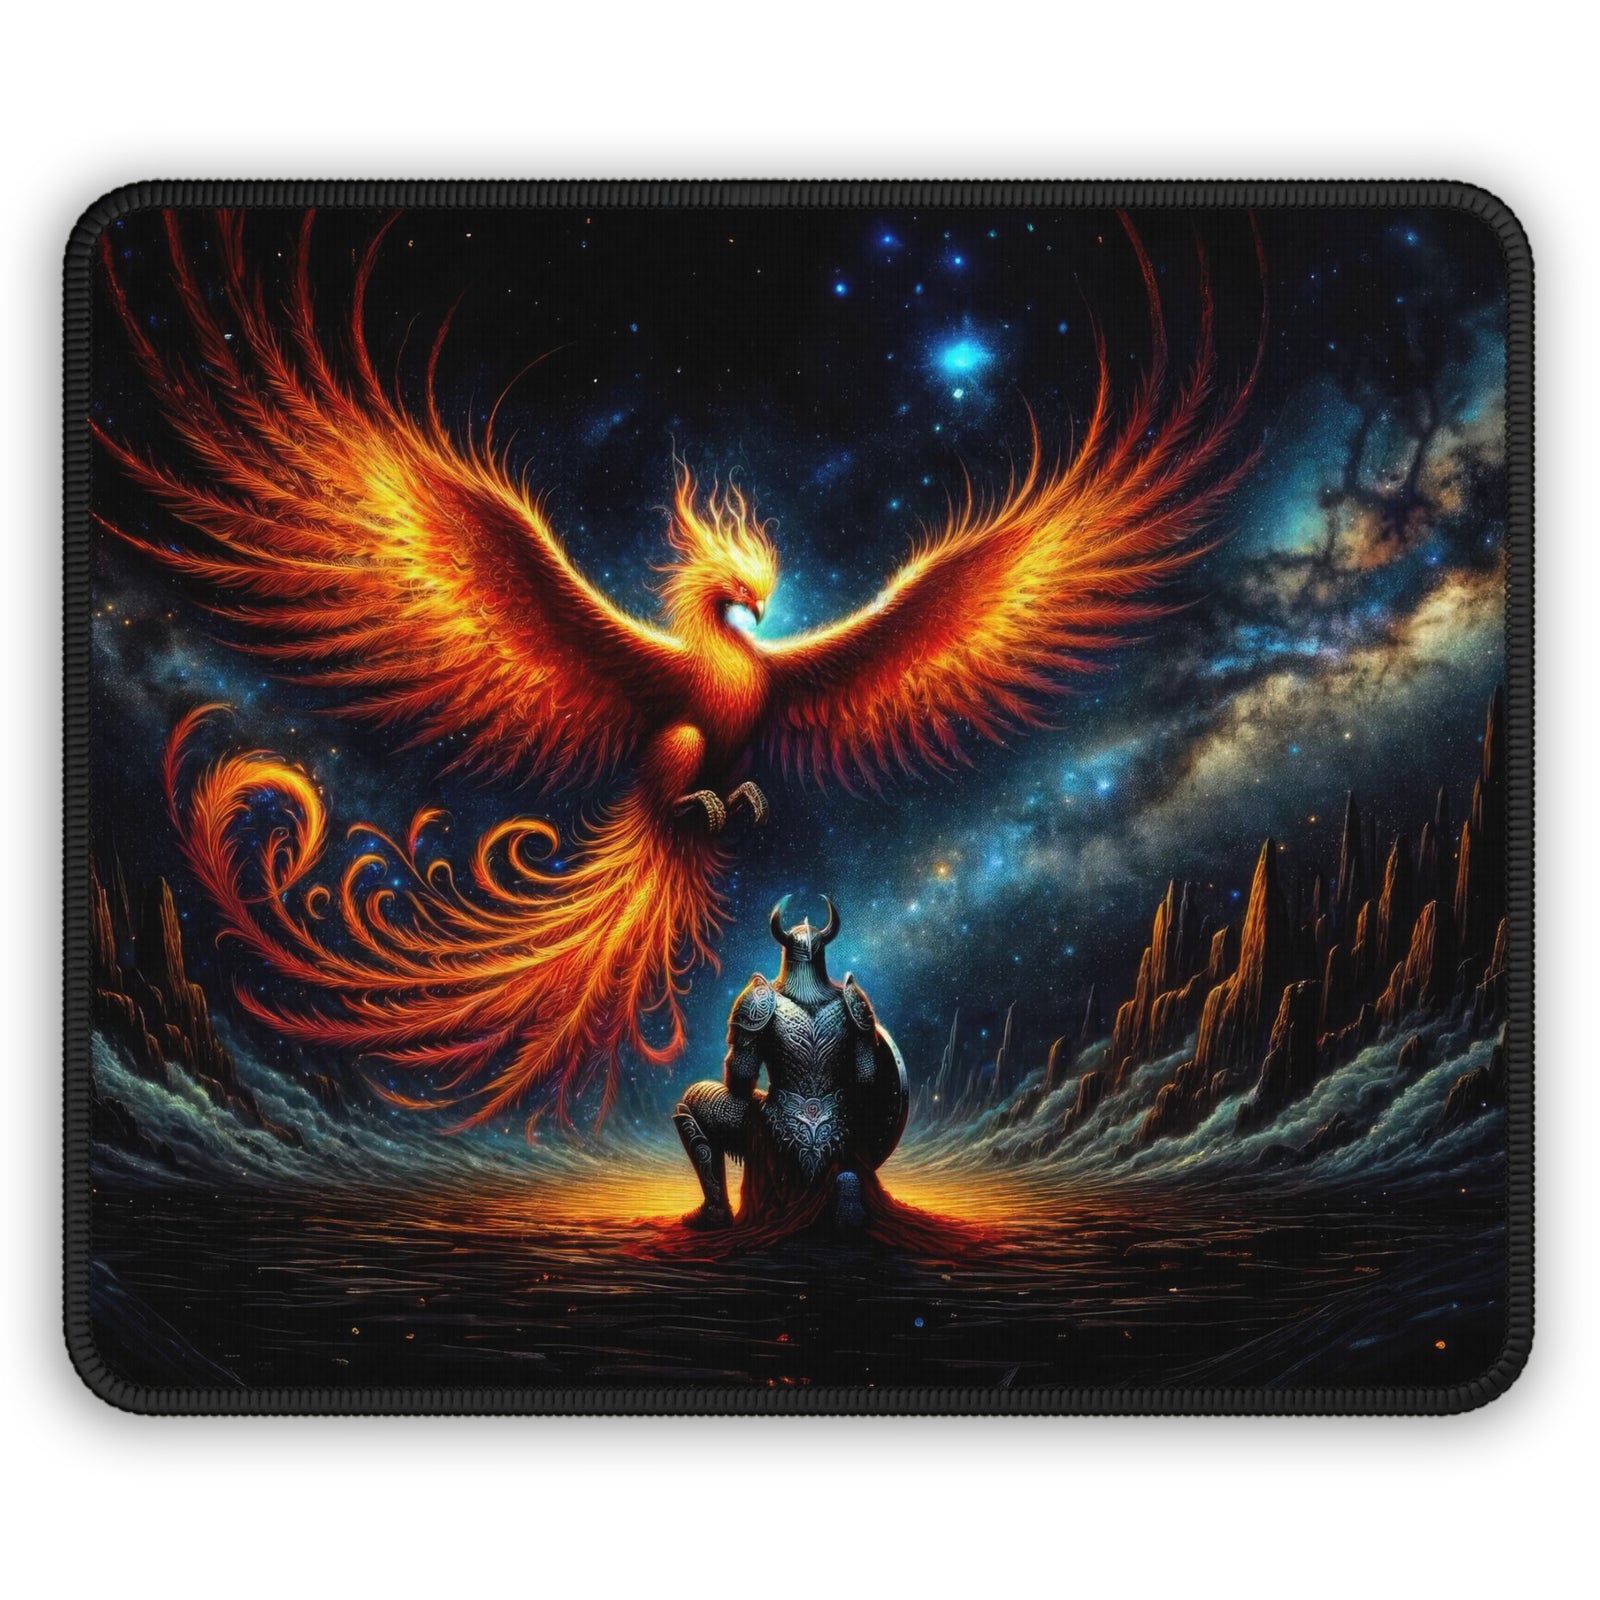 The Cosmic Rebirth of the Phoenix and the Watcher Gaming Mouse Pad